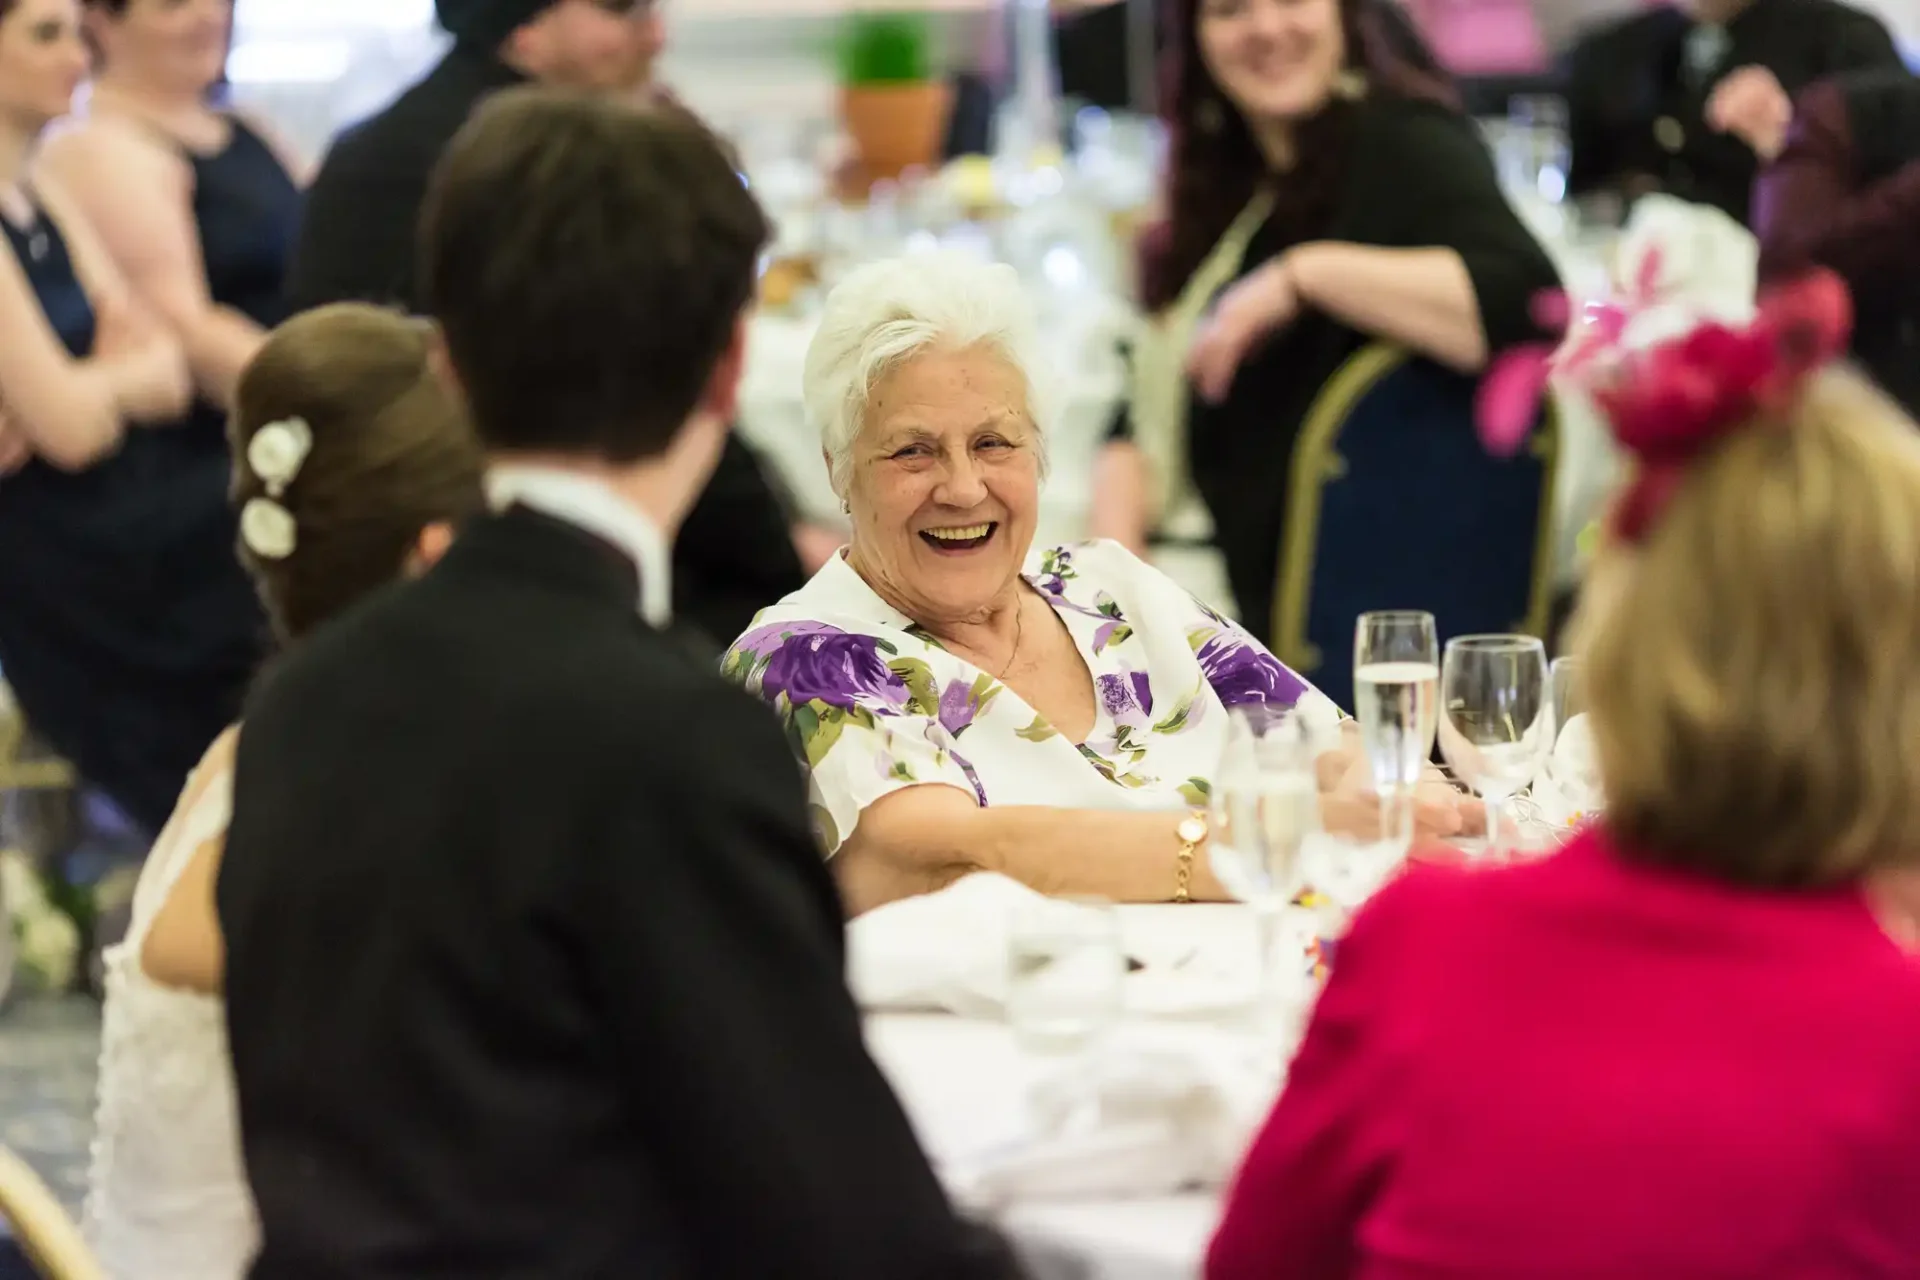 Elderly woman laughing joyfully at a wedding reception, surrounded by guests in a decorated venue.